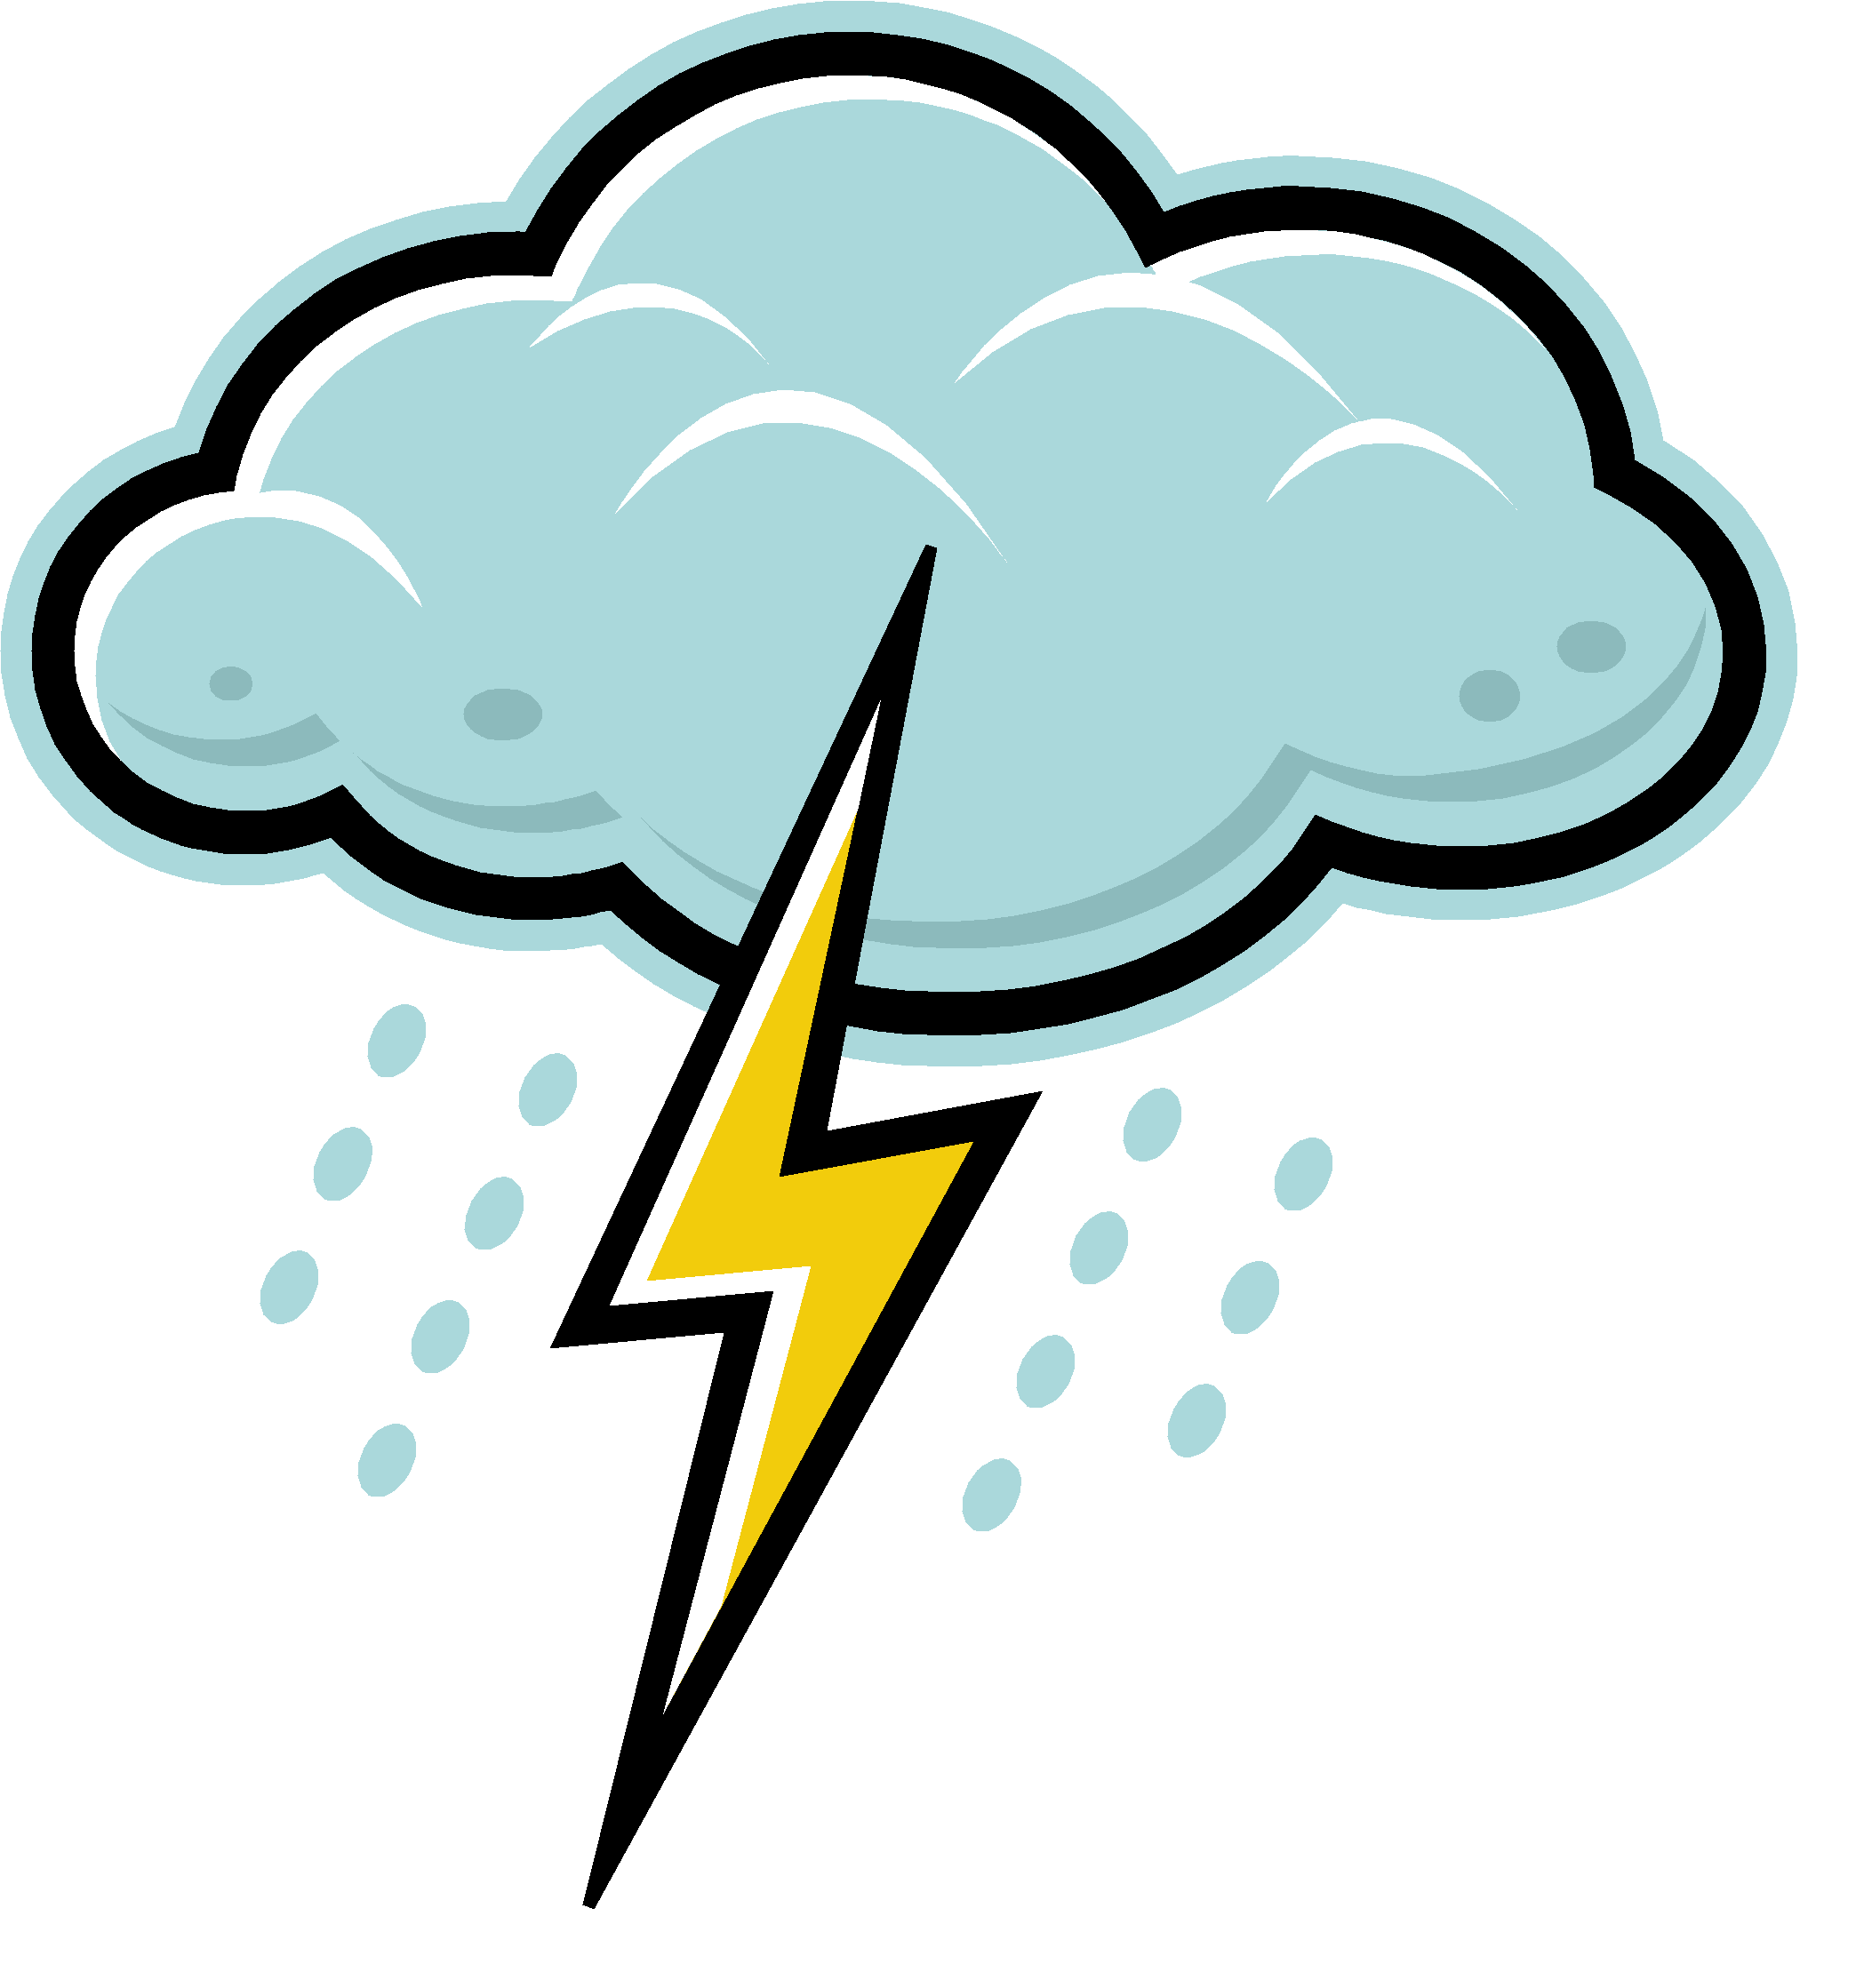 thunder-clipart-severe-weather-pictures-on-cliparts-pub-2020